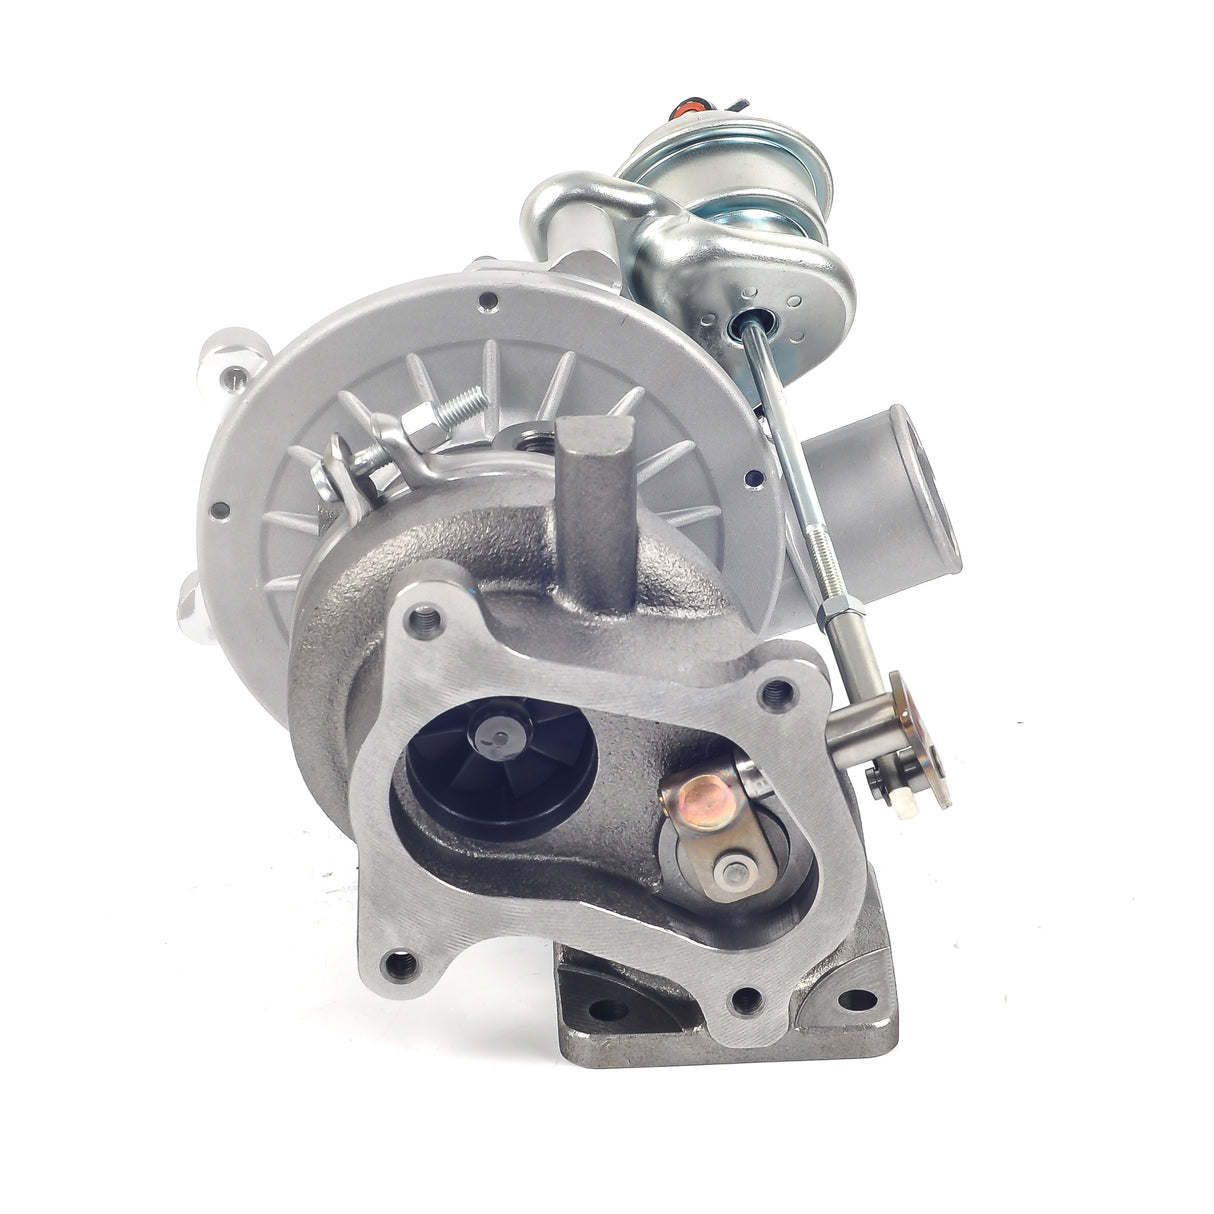 CCT Turbocharger To Suit Mazda Bravo B2500 / Ford Courier  2.5L WL84 WL85